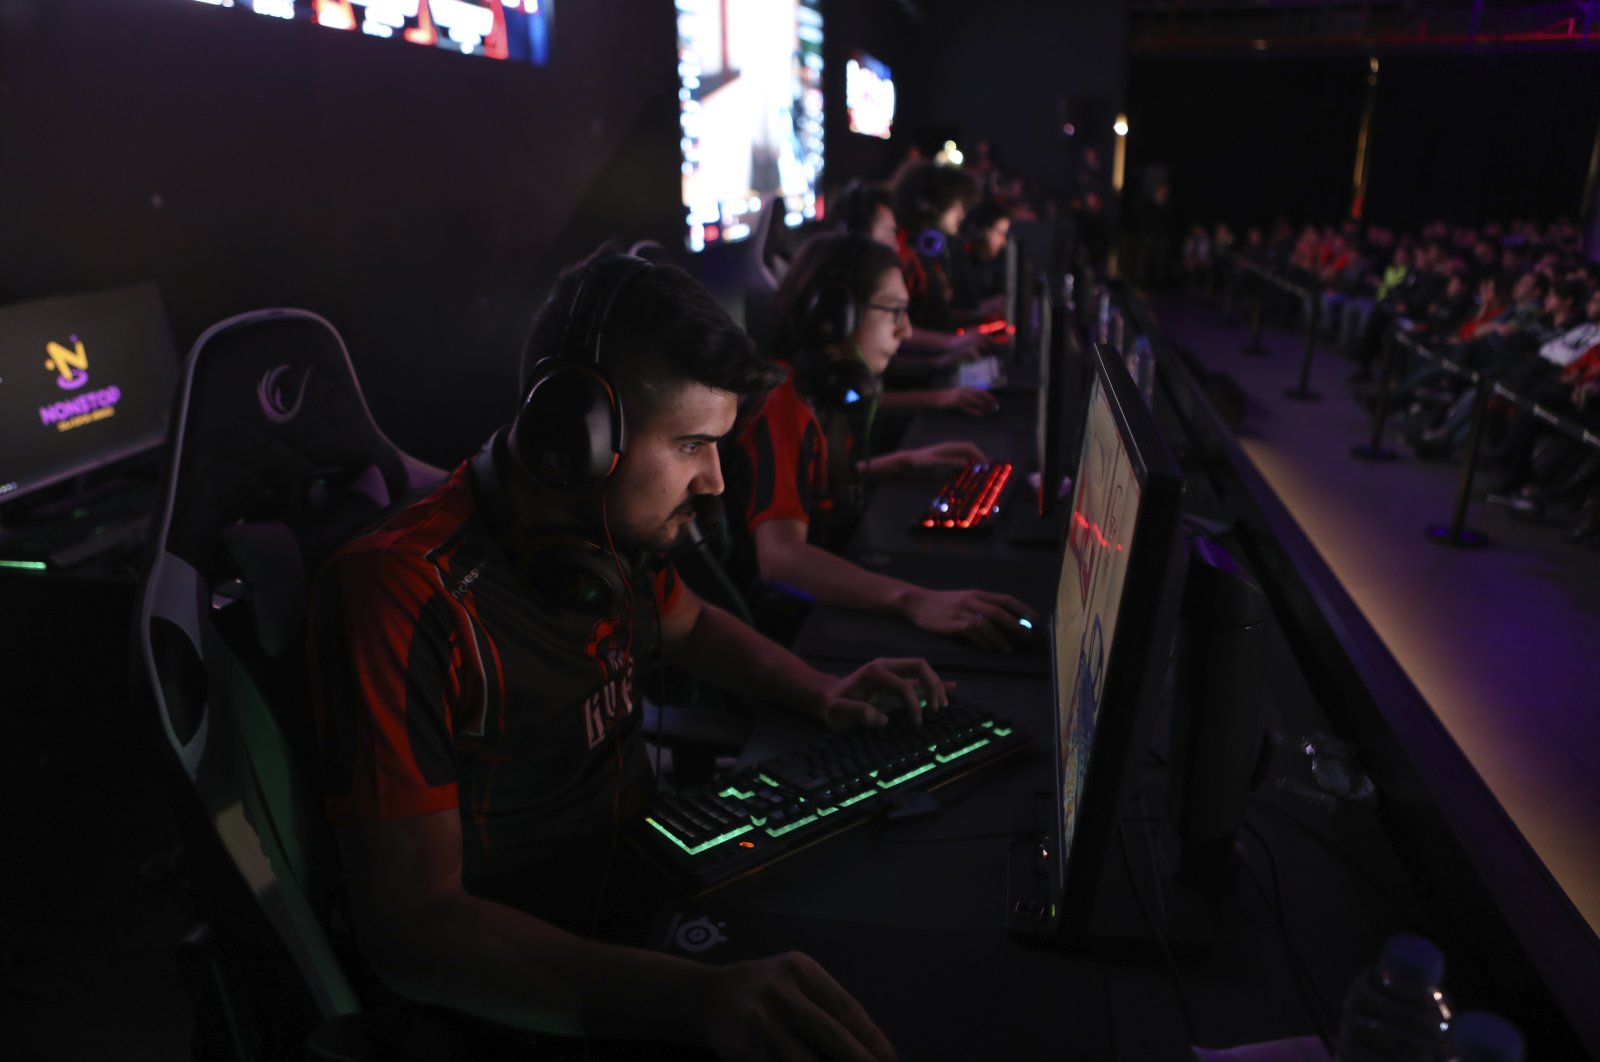 Players compete at the Turkish Esports Cup in Istanbul, Turkey, Jan. 27, 2019. (AA PHOTO)